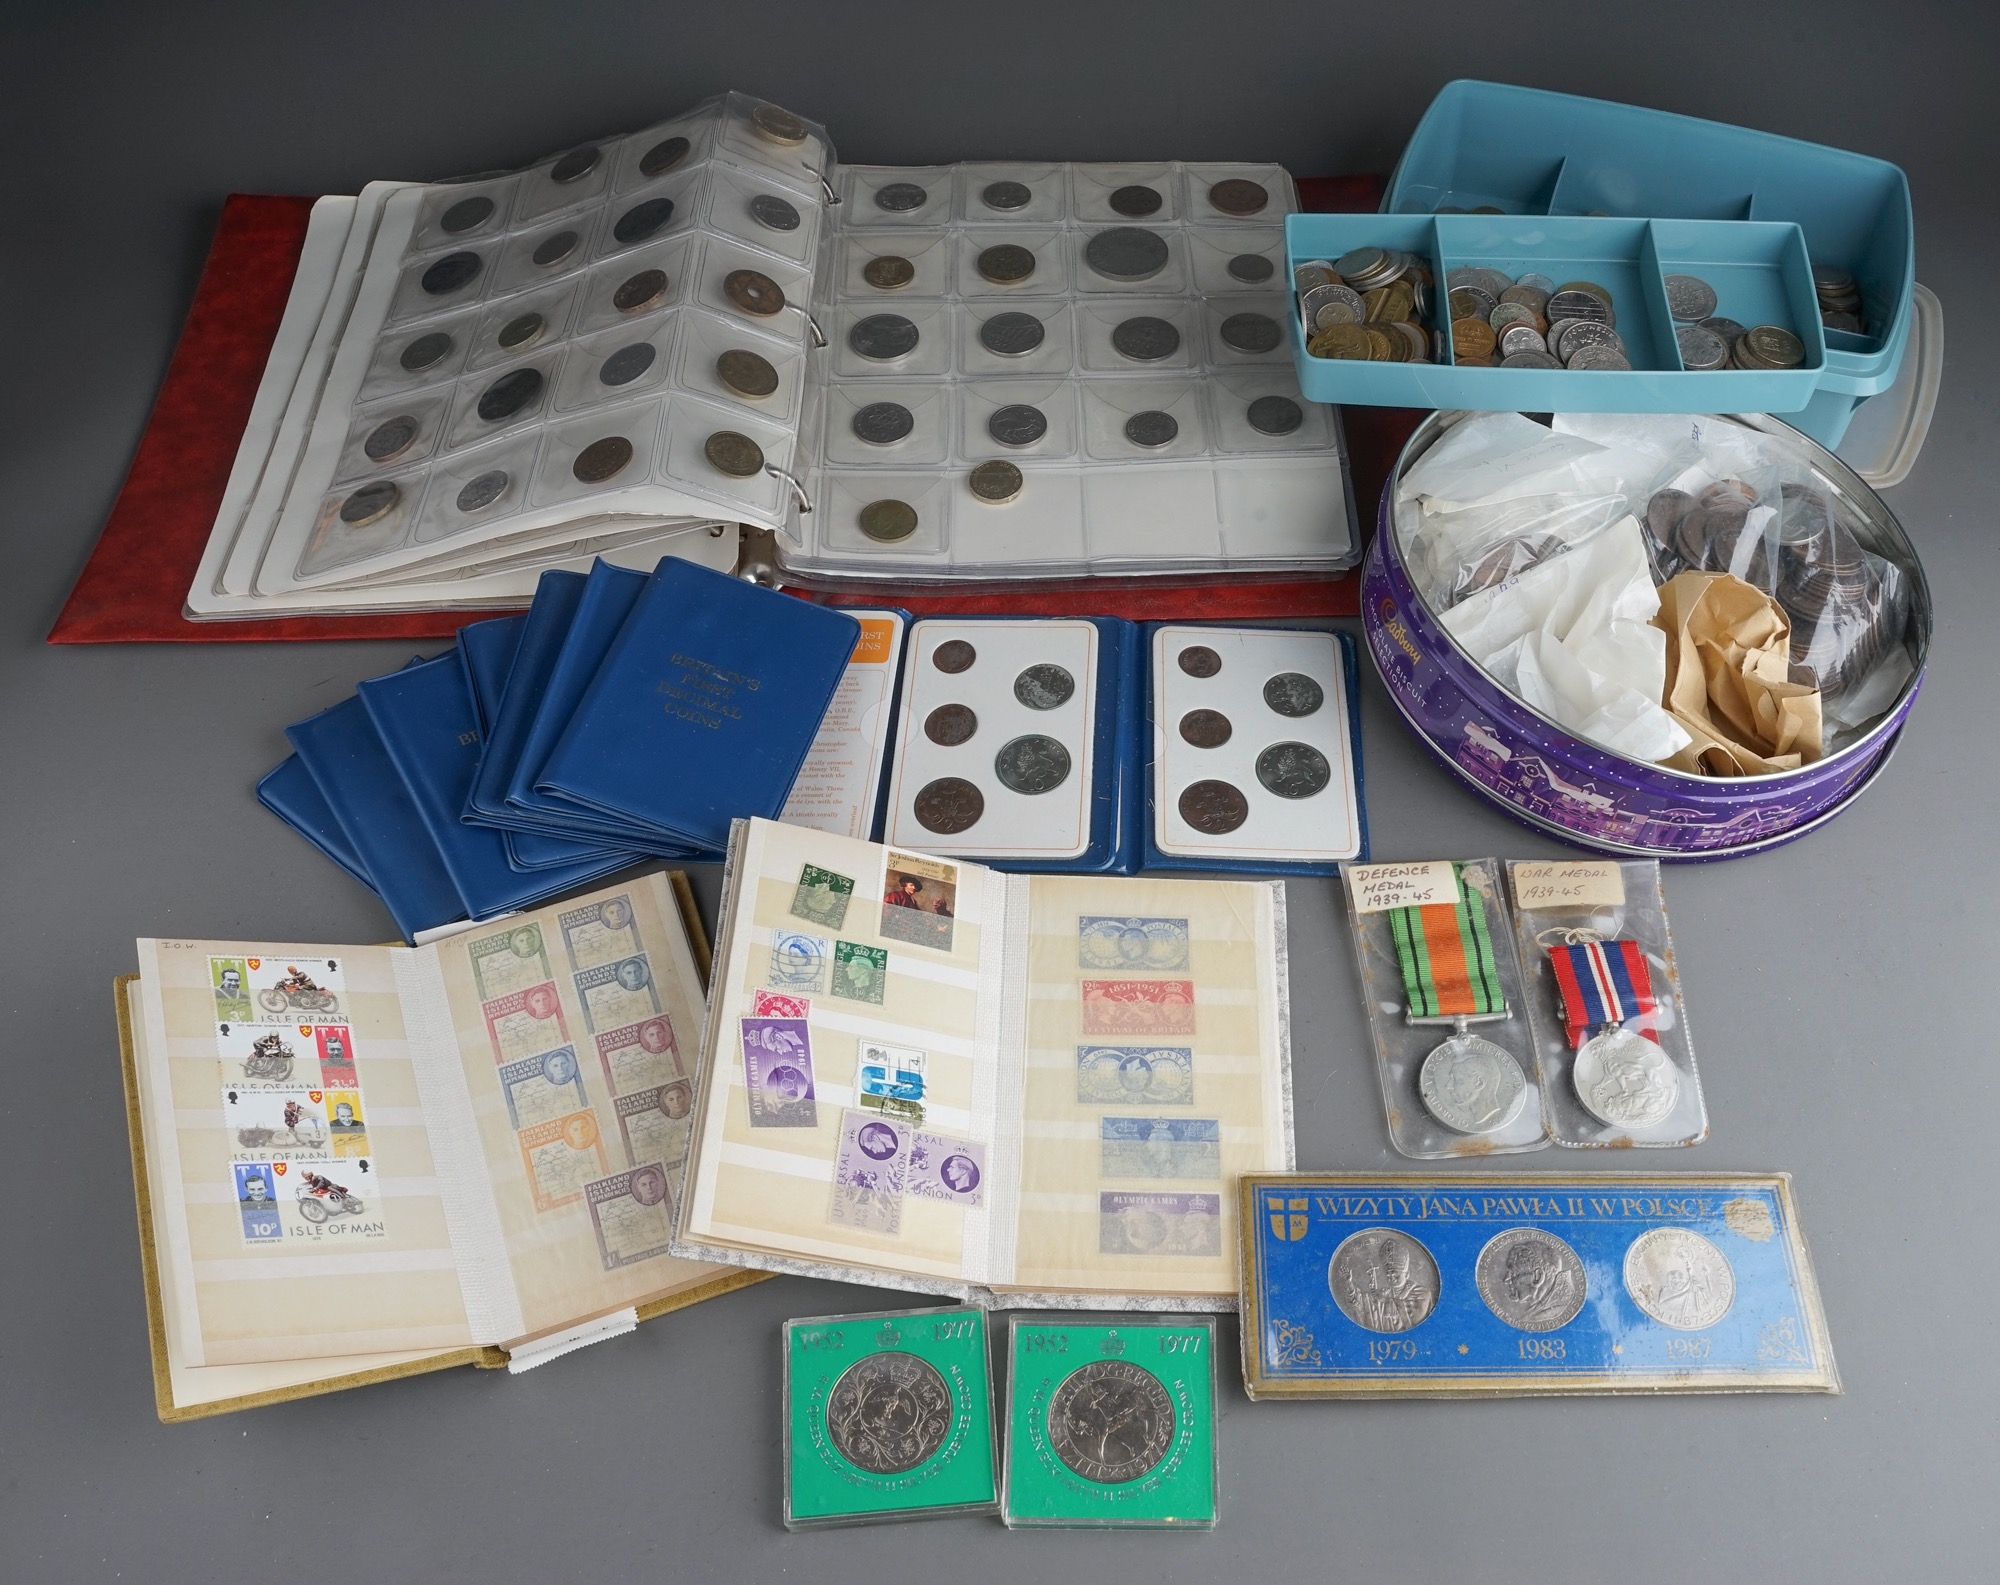 A large collection of GB and World coins including two WWII medals (Defence and War Medal with